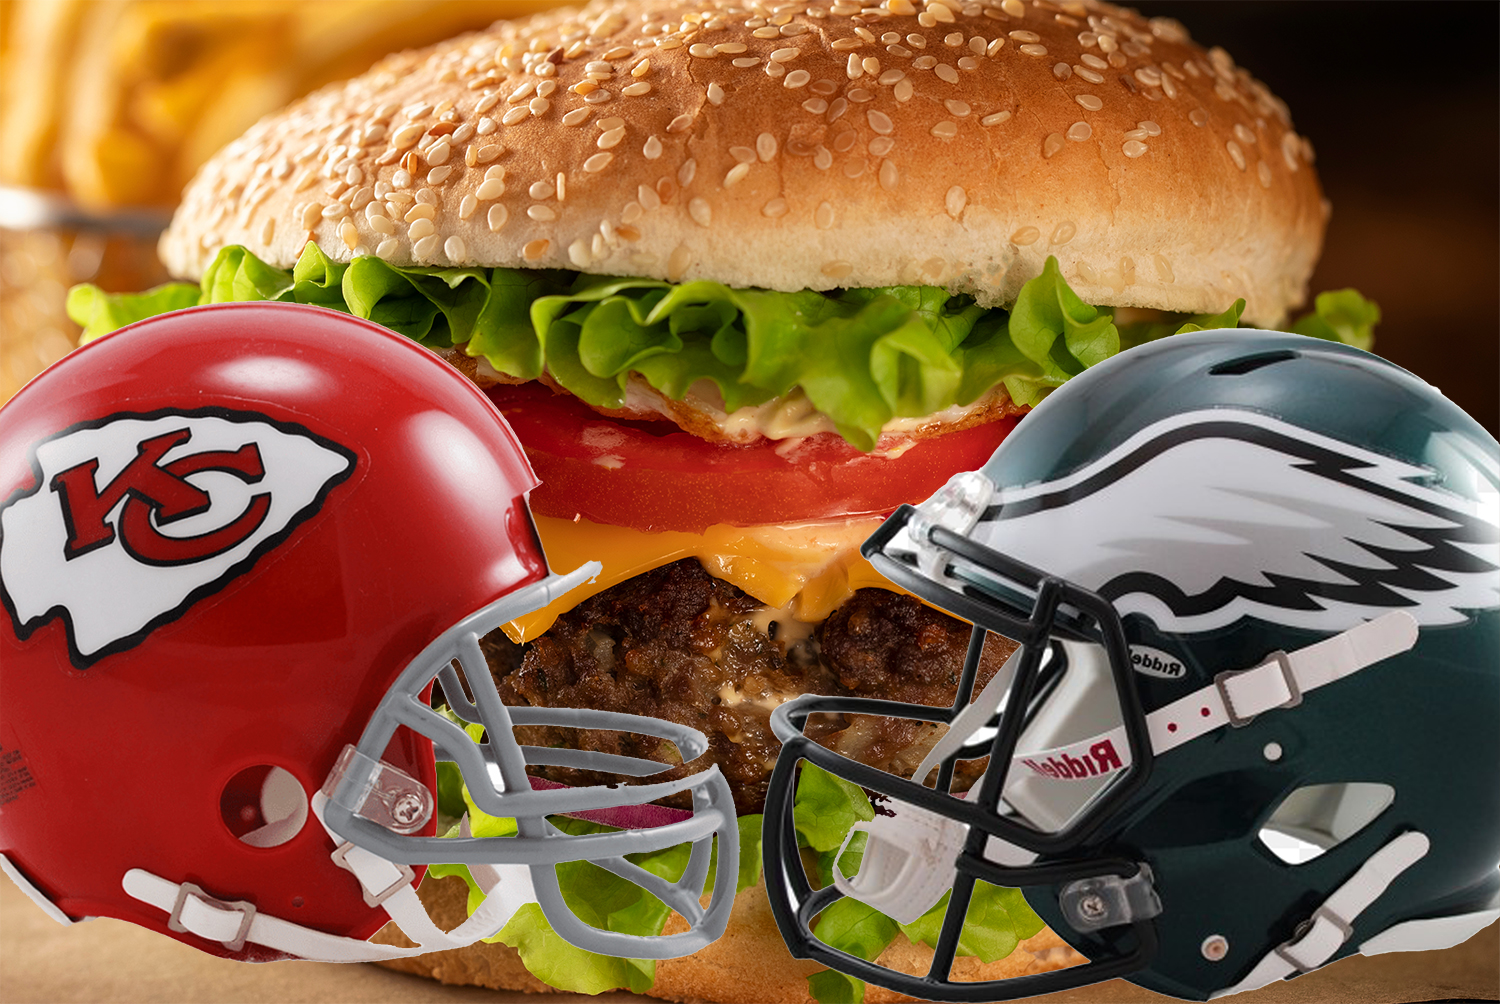 super-bowl-teams-helmets-with-hamburger-in-the-background